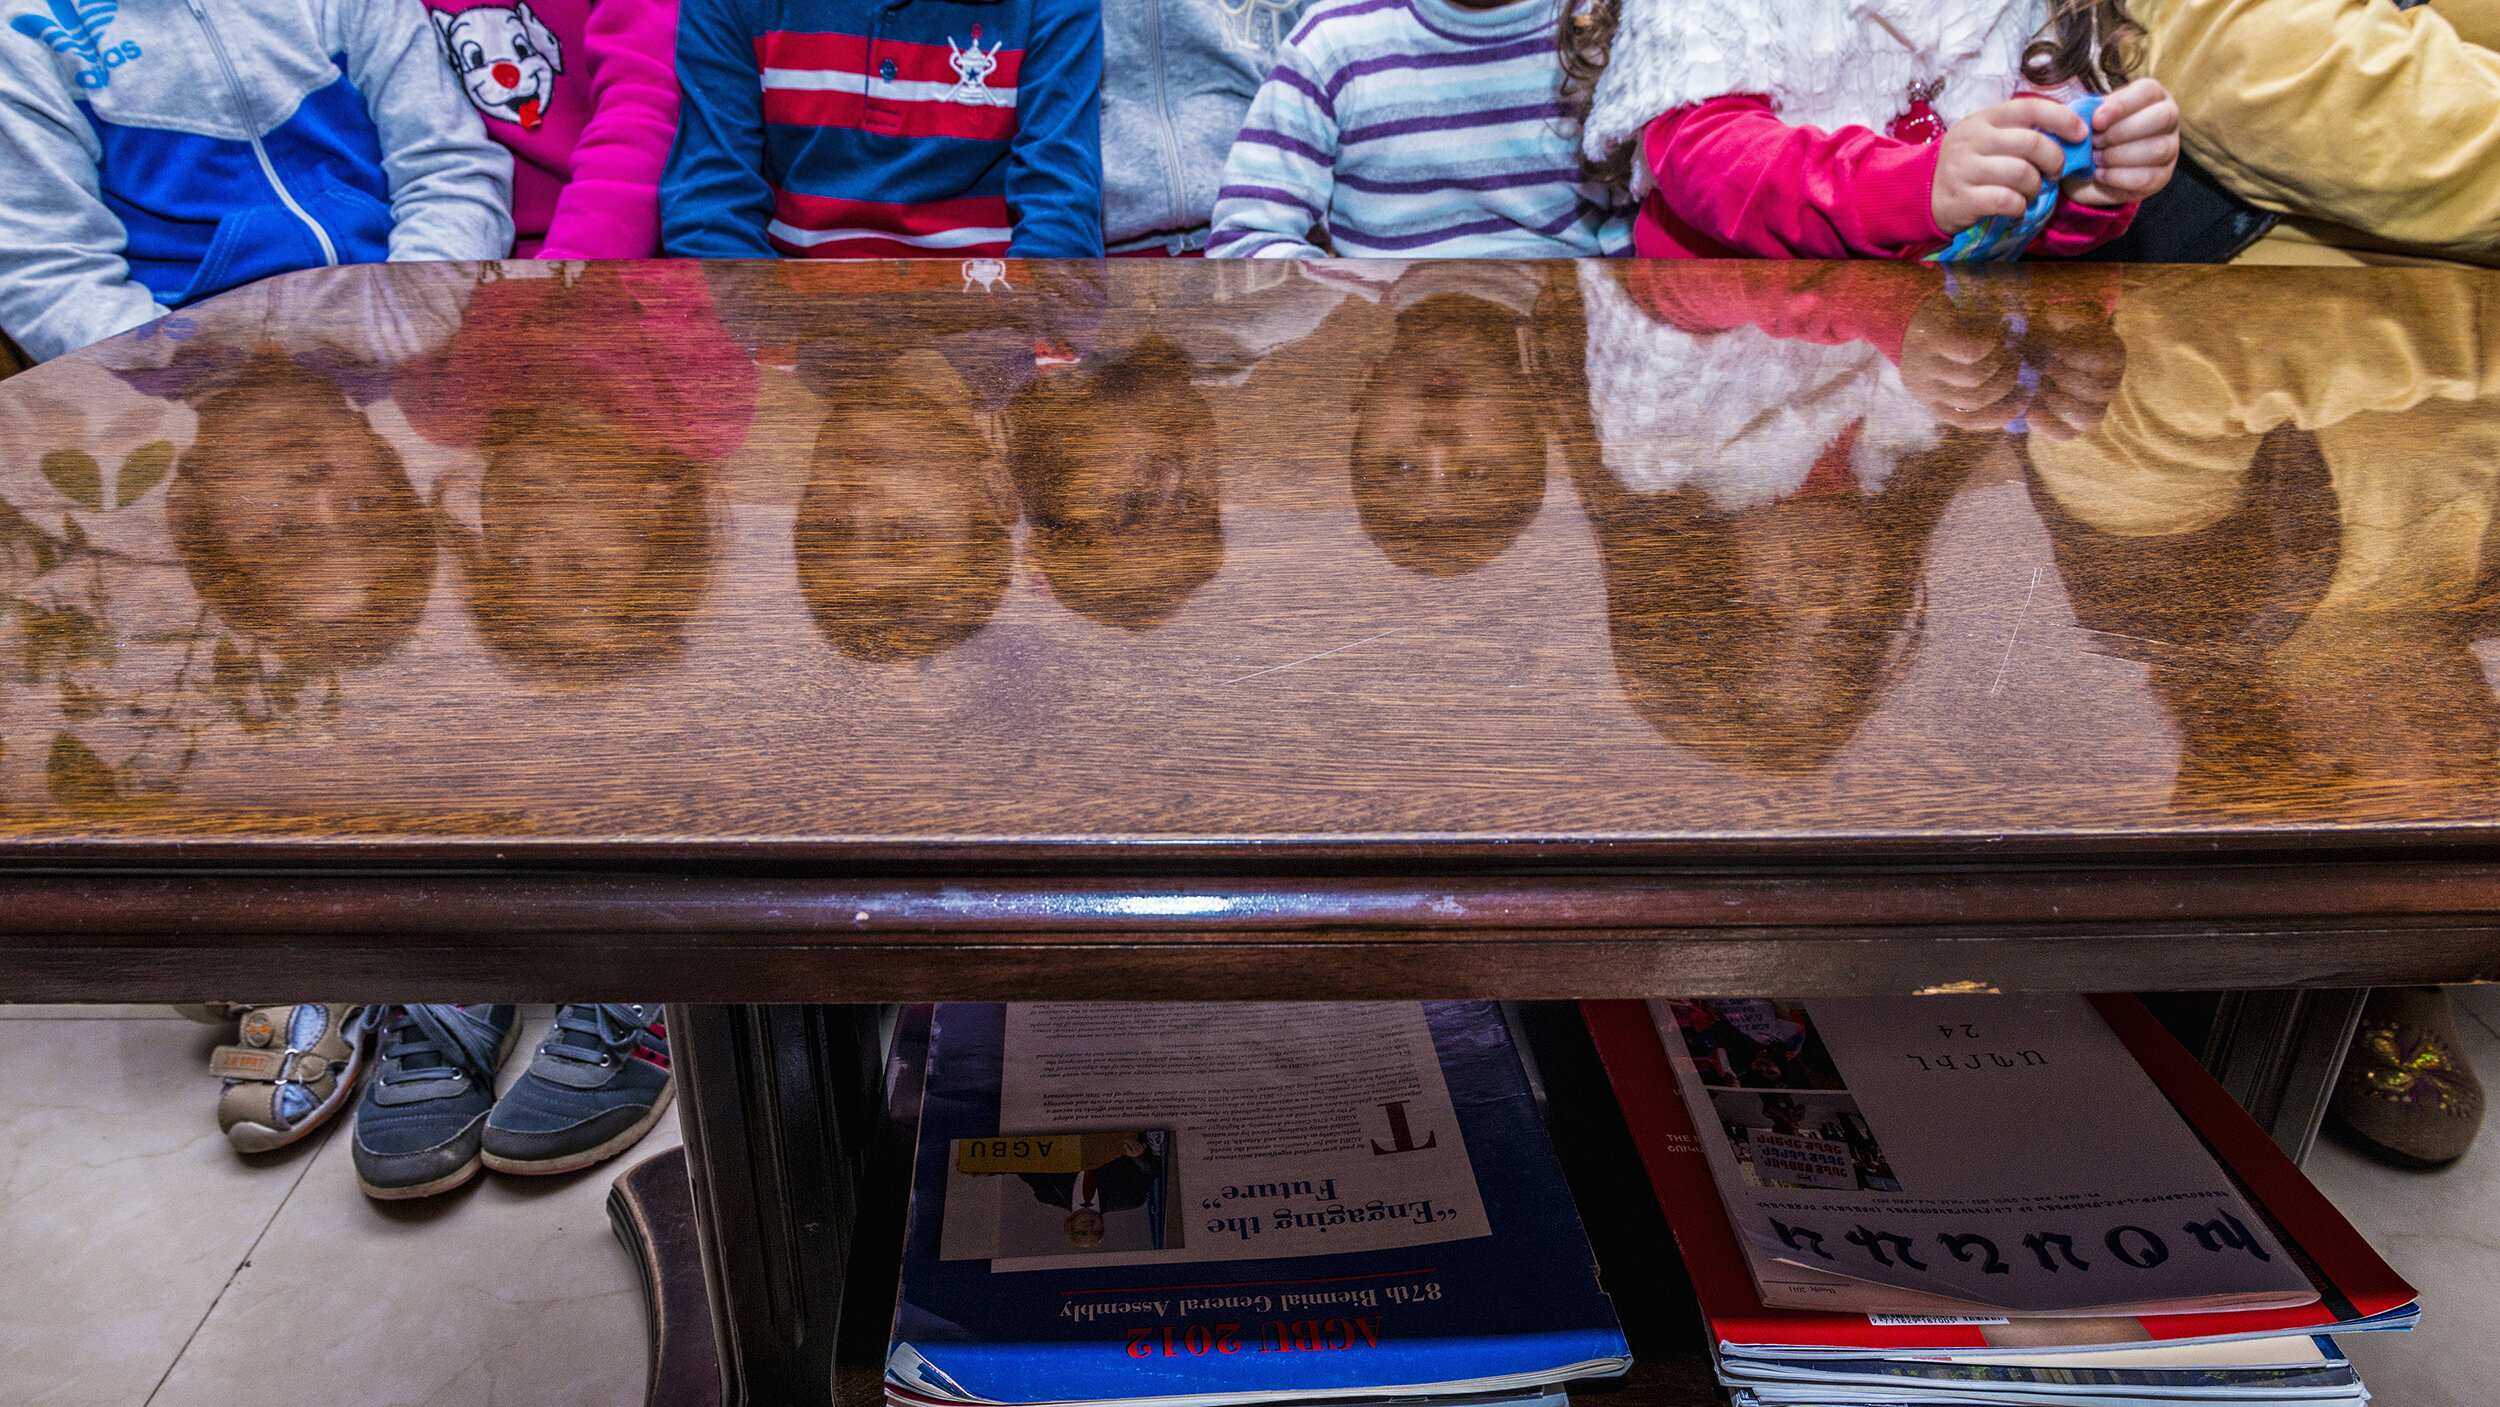  Children displaced by the Four-Day War are reflected in a table at the Nairi Hotel in Stepanakert, Nagorno-Karabakh.  Thousands of women and children fled towns along the Line of Contact while men stayed to defend and rebuild their homes. 